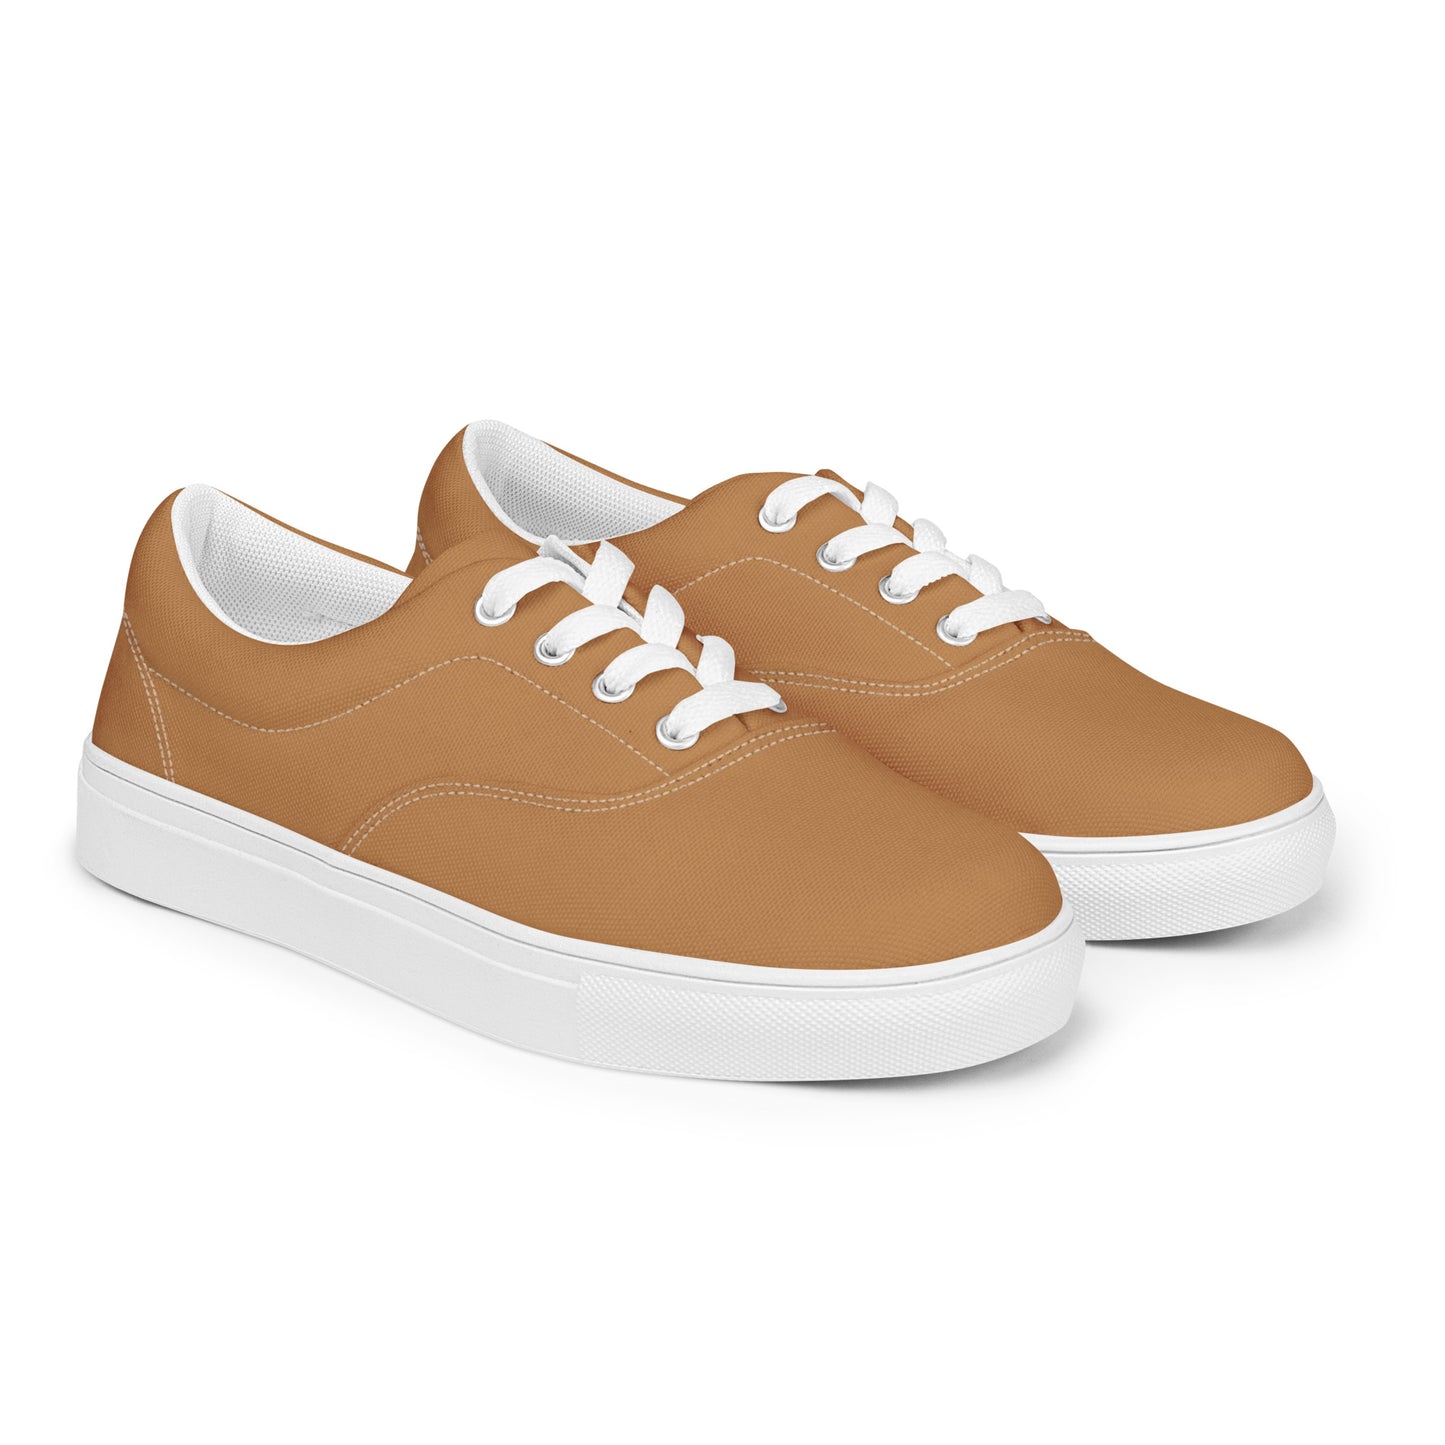 Women’s Nude Lace-up Canvas Shoes